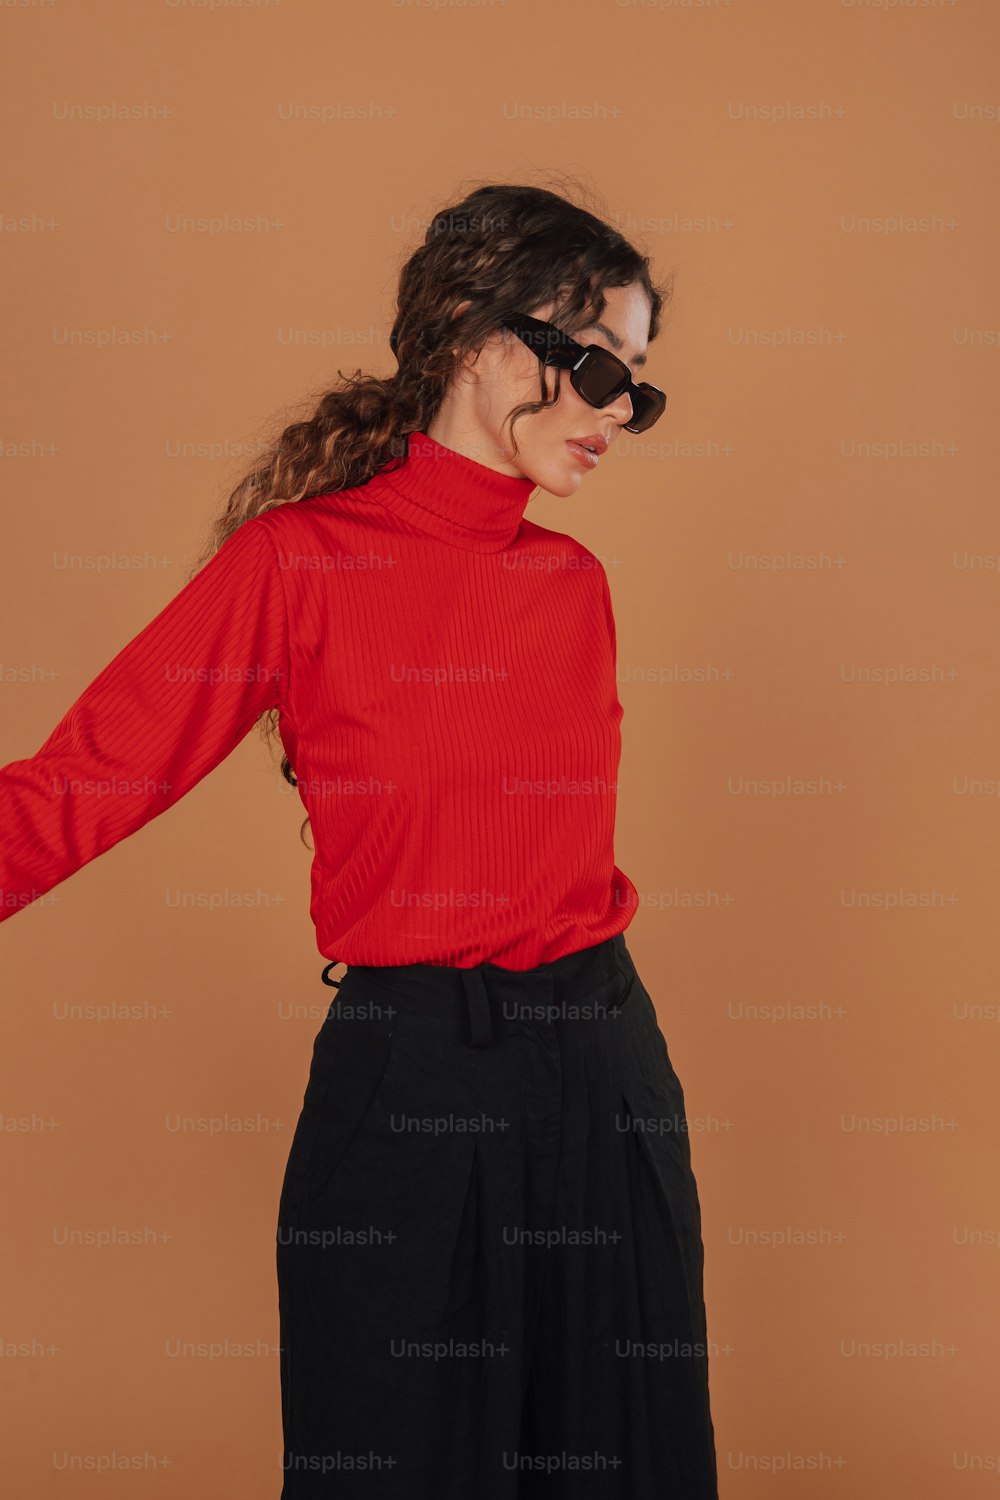 a woman wearing a red shirt and black pants